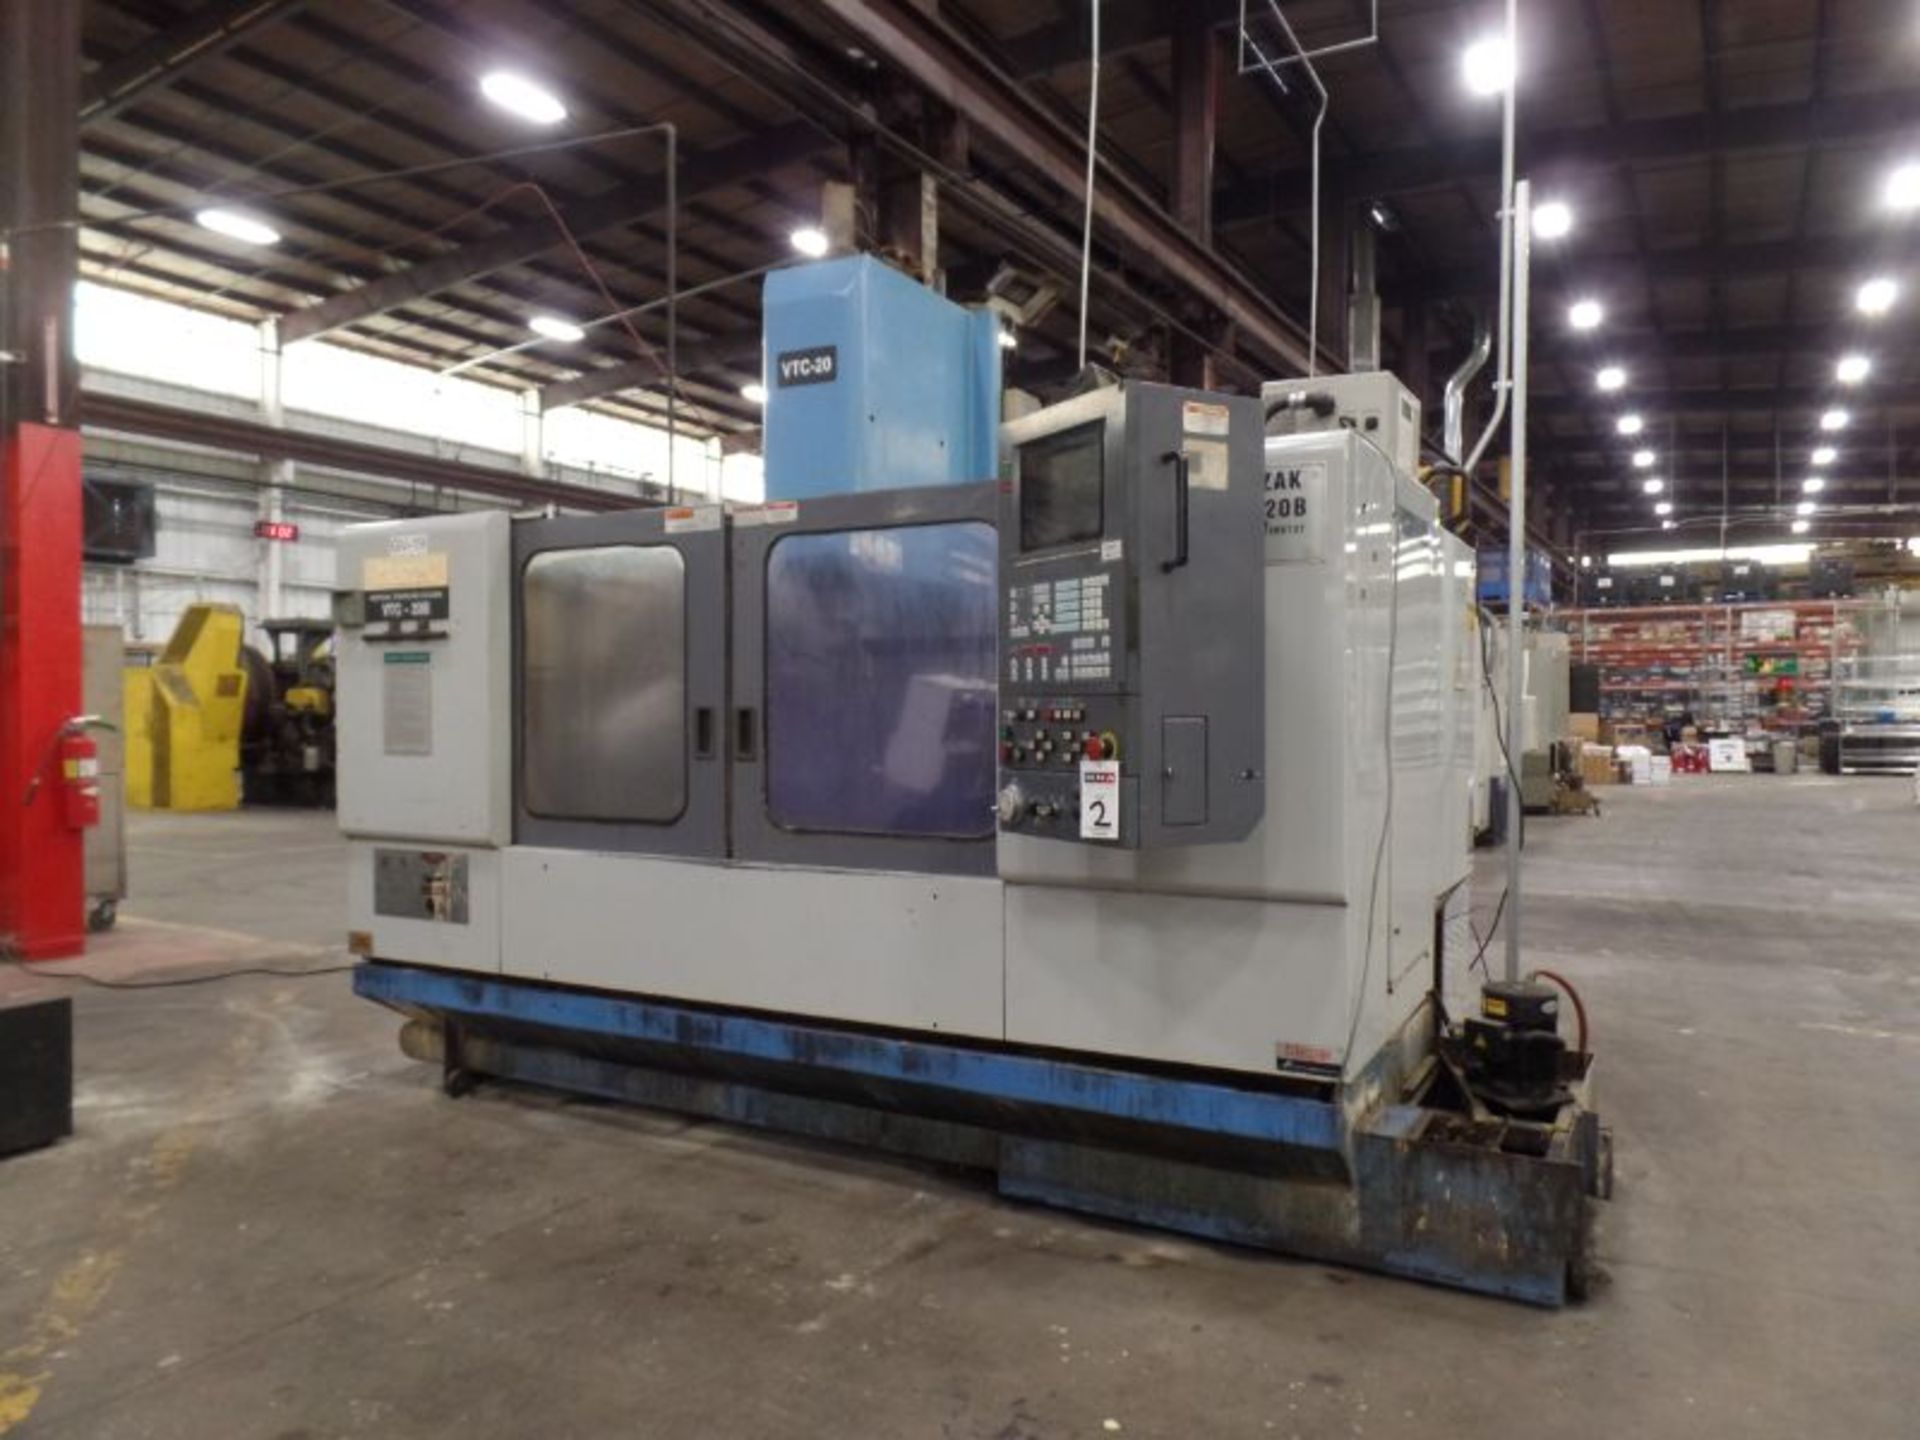 Mazak VTC20B, M-Plus Ctrl, 44”x 20”x 20” Travels, CT40, New1998 *Rotary Table Sold Separate* - Image 2 of 9